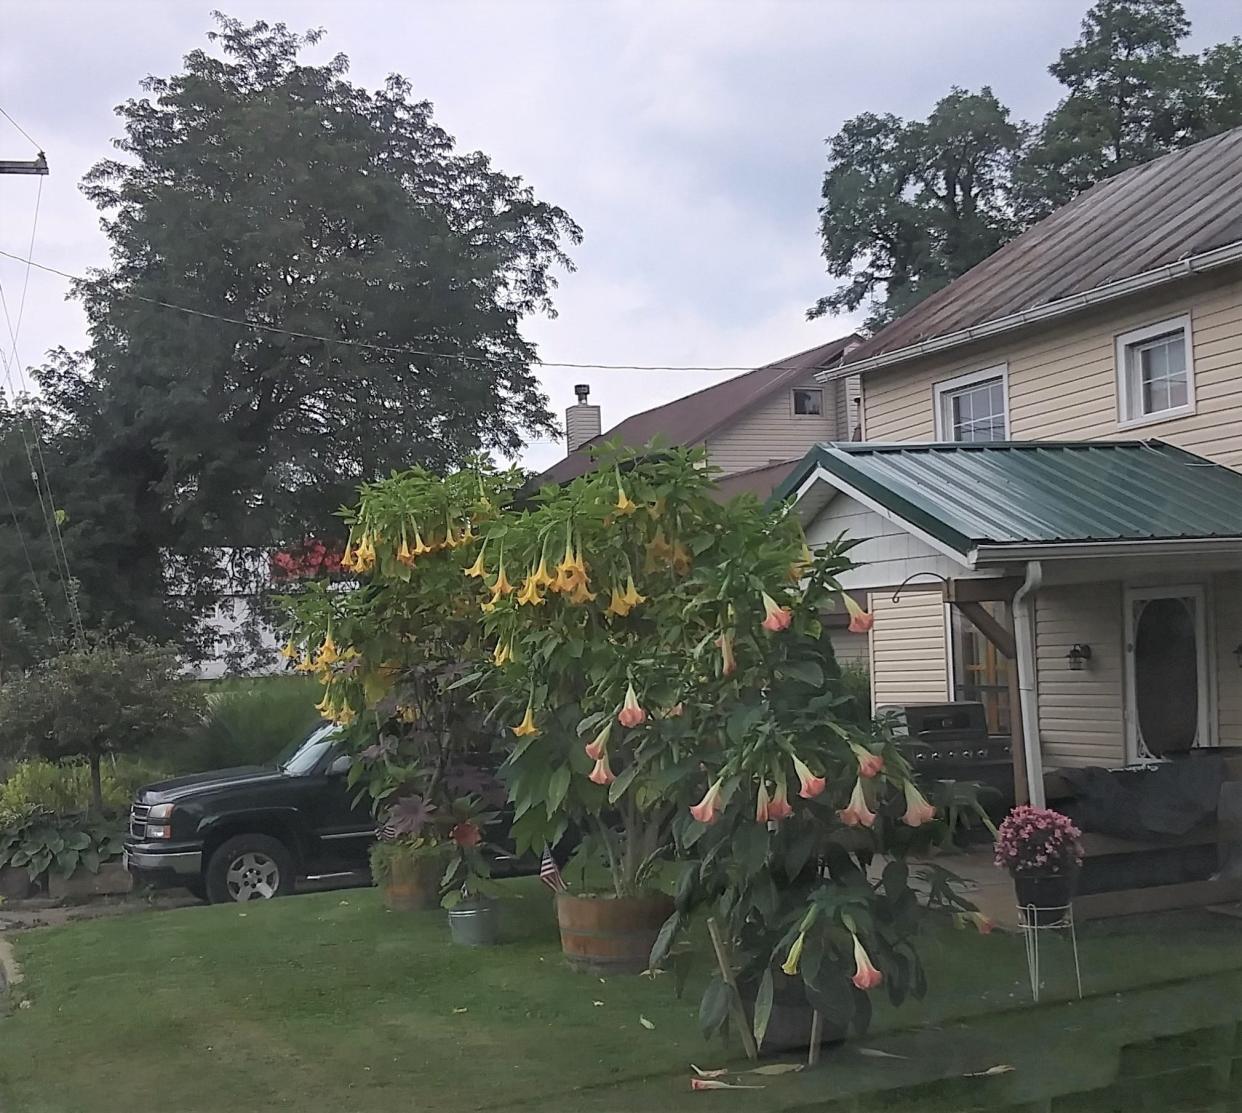 Angel’s trumpet, or Brugmansia, is planted in a front yard in Jeromesville. The angel’s trumpet is a heavy feeder and does the best with organic fertilizers.